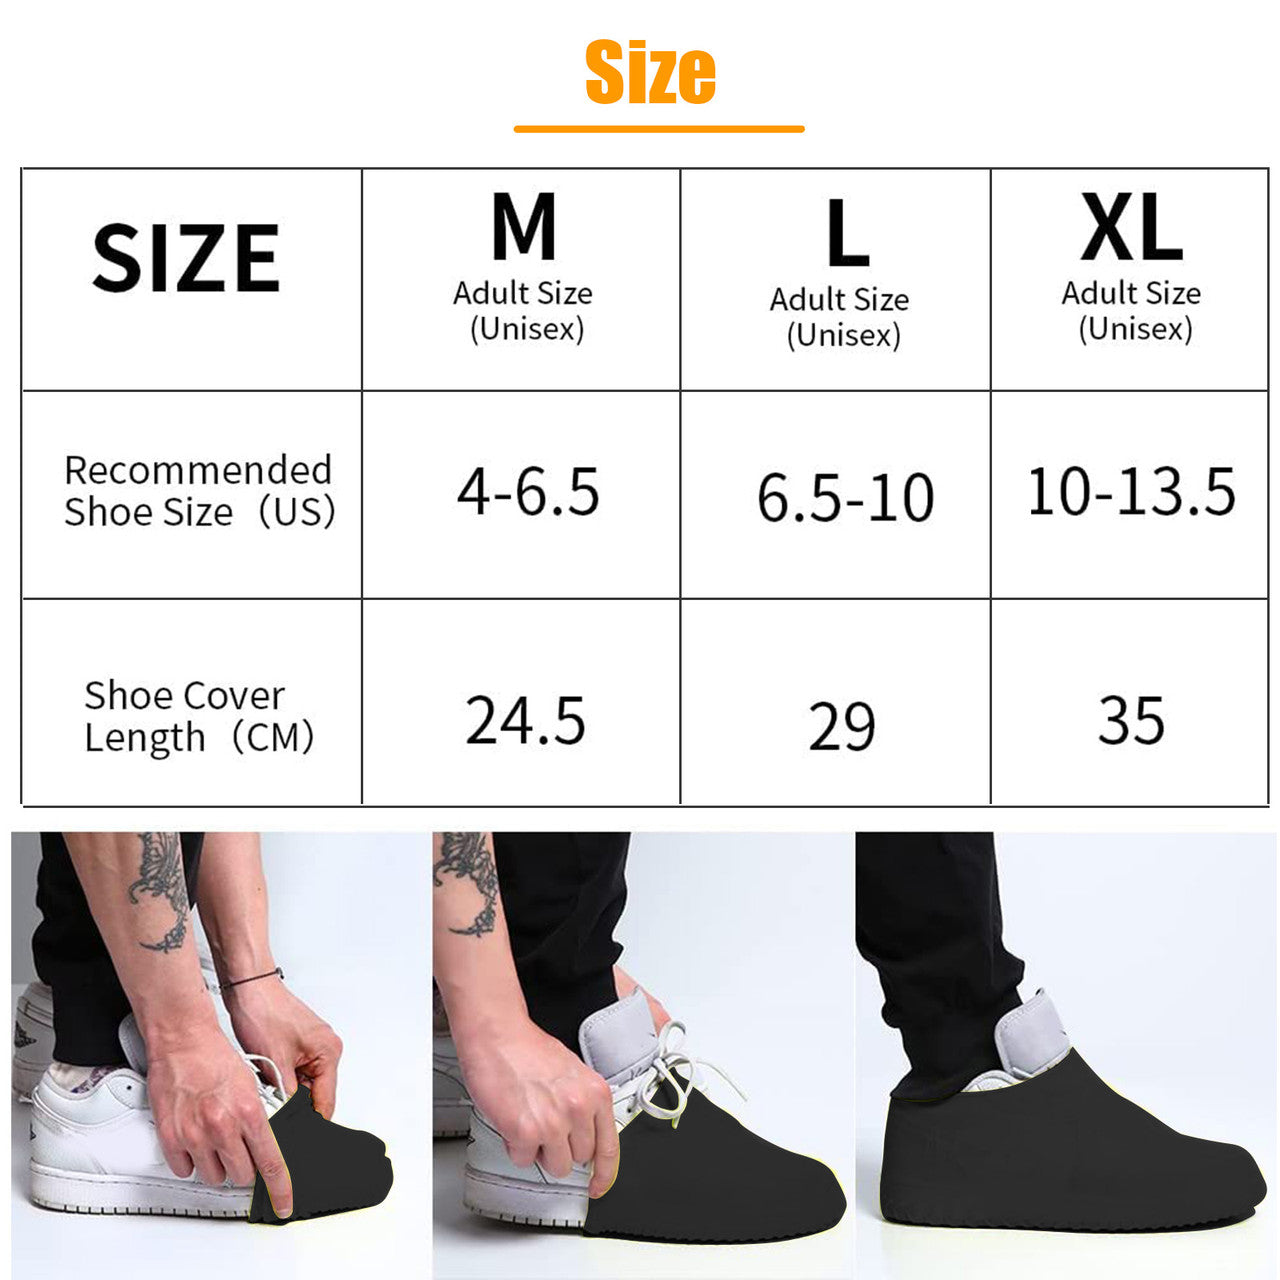 Waterproof Silicone Rain Shoe Cover - Non Slip,Water Resistant,Reusable,Stretchable,Foldable Size L (Black)